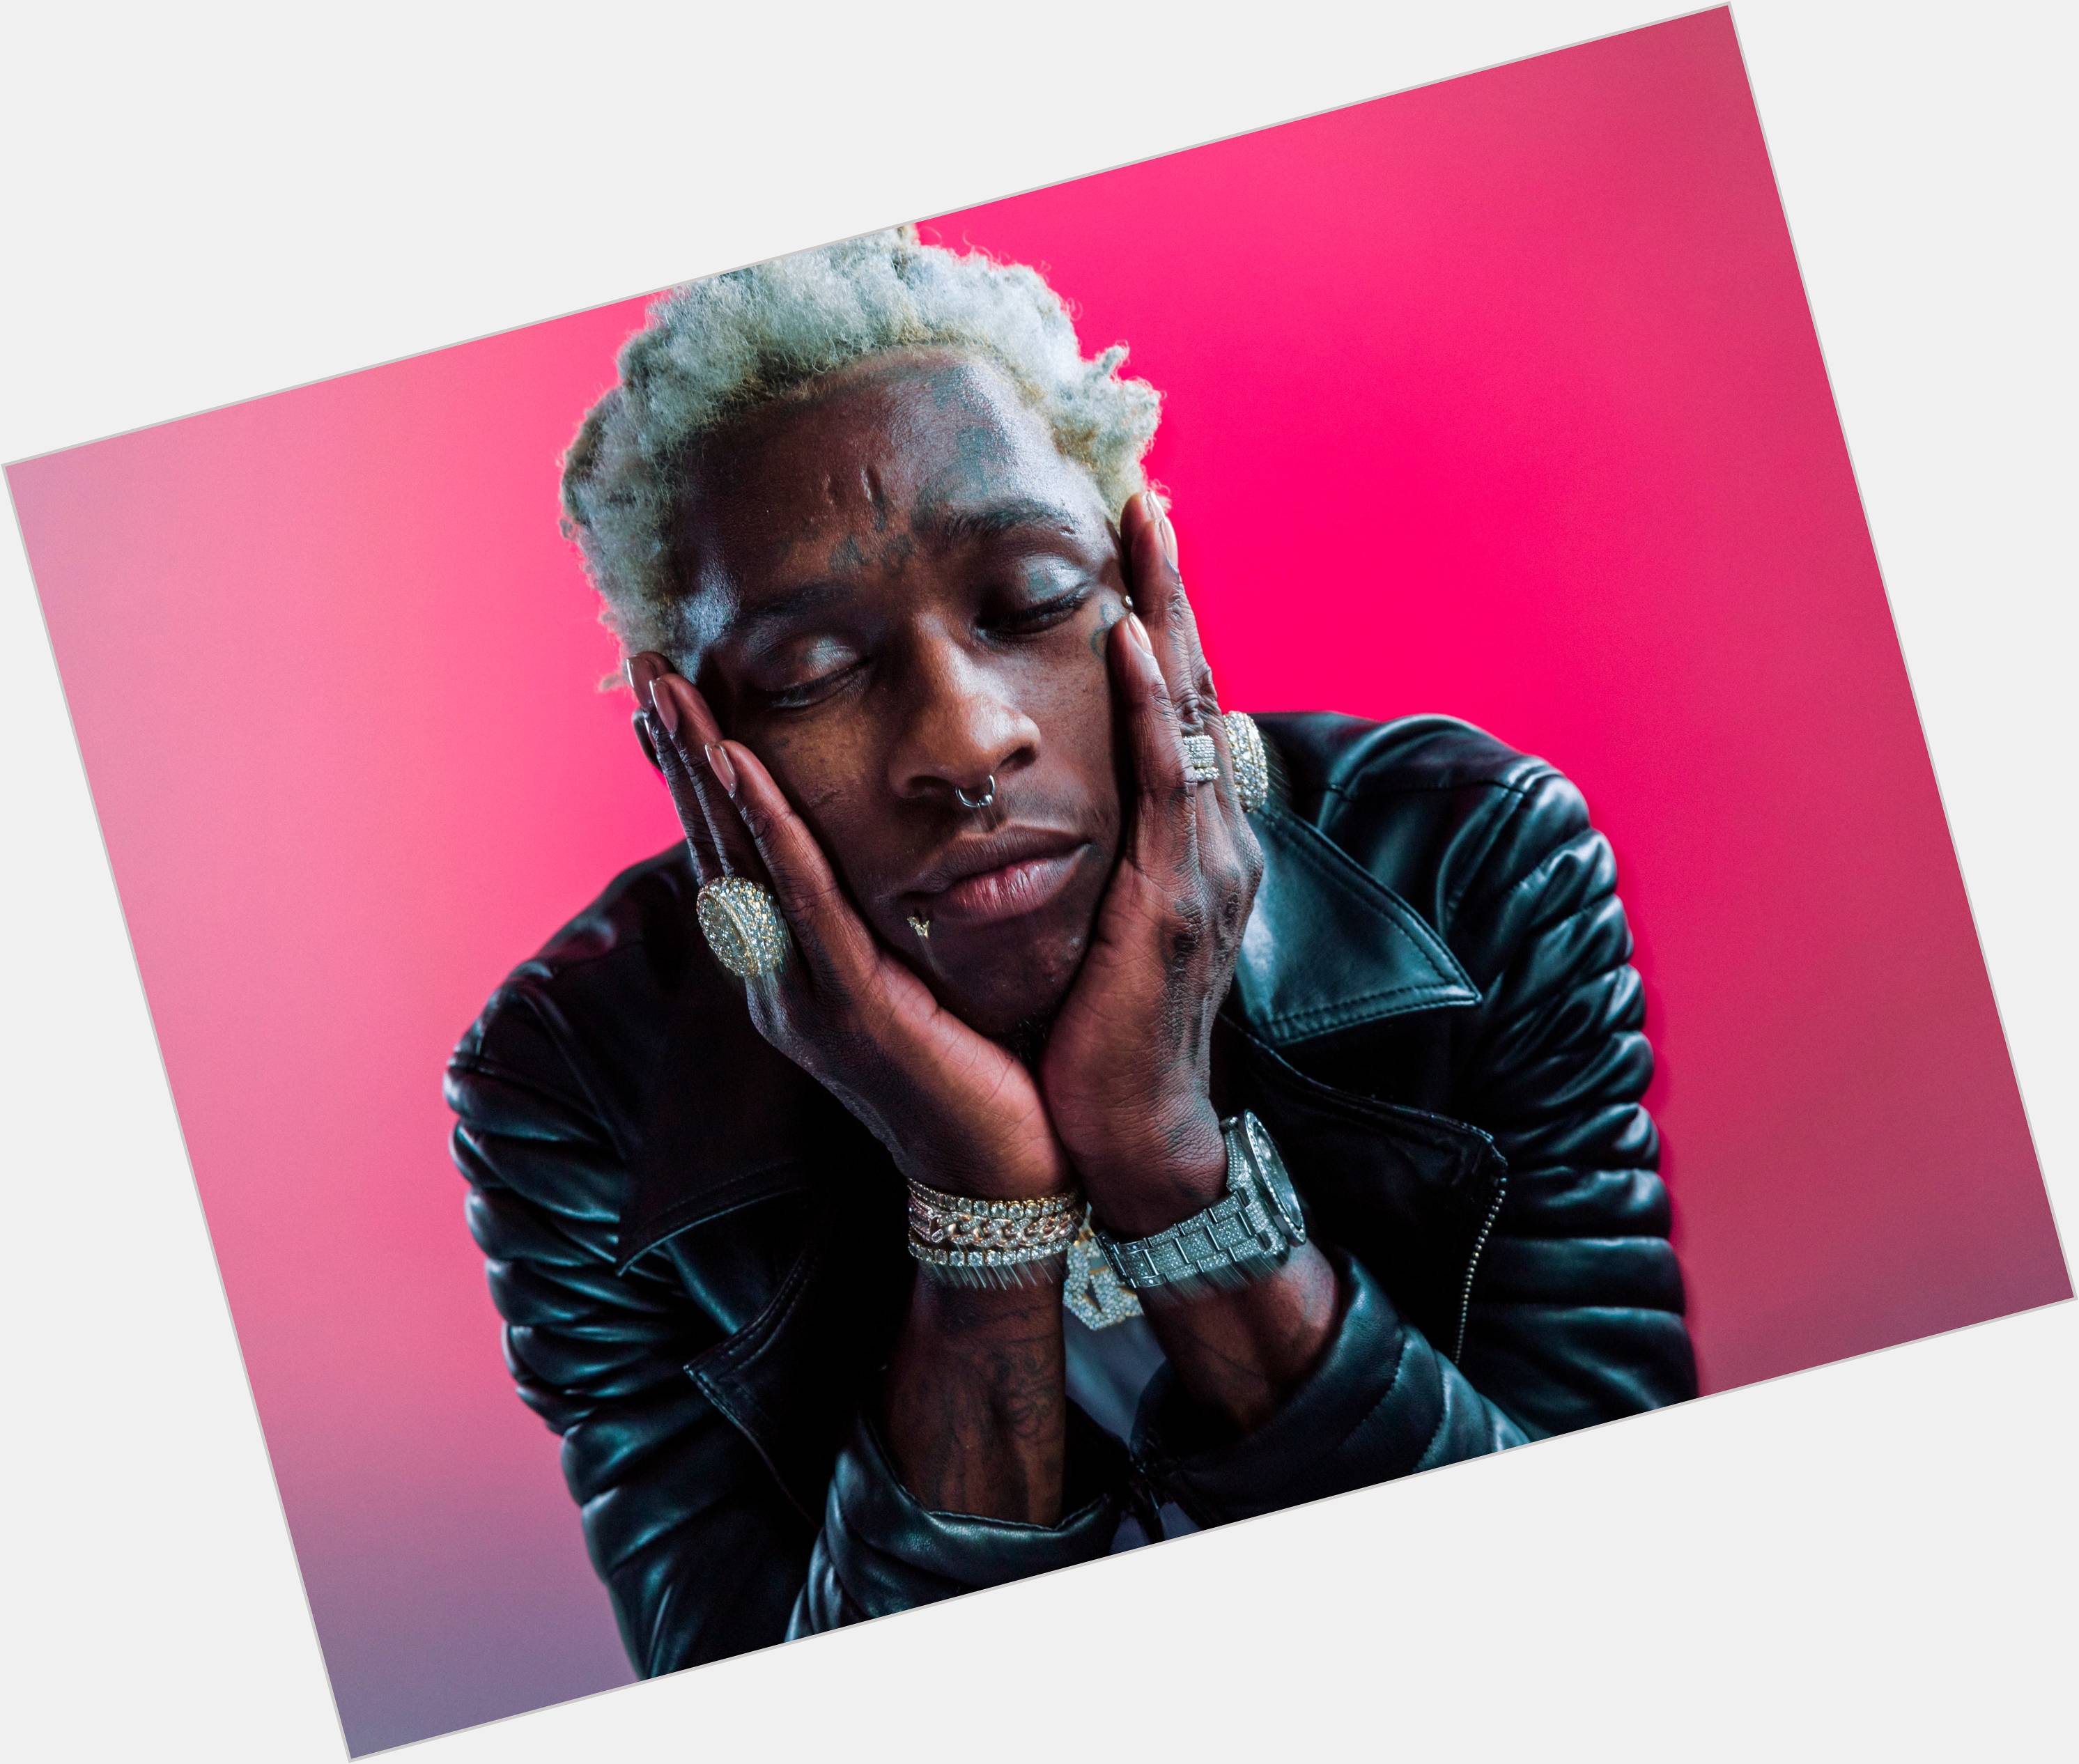 Http://fanpagepress.net/m/Y/Young Thug Sexy 1